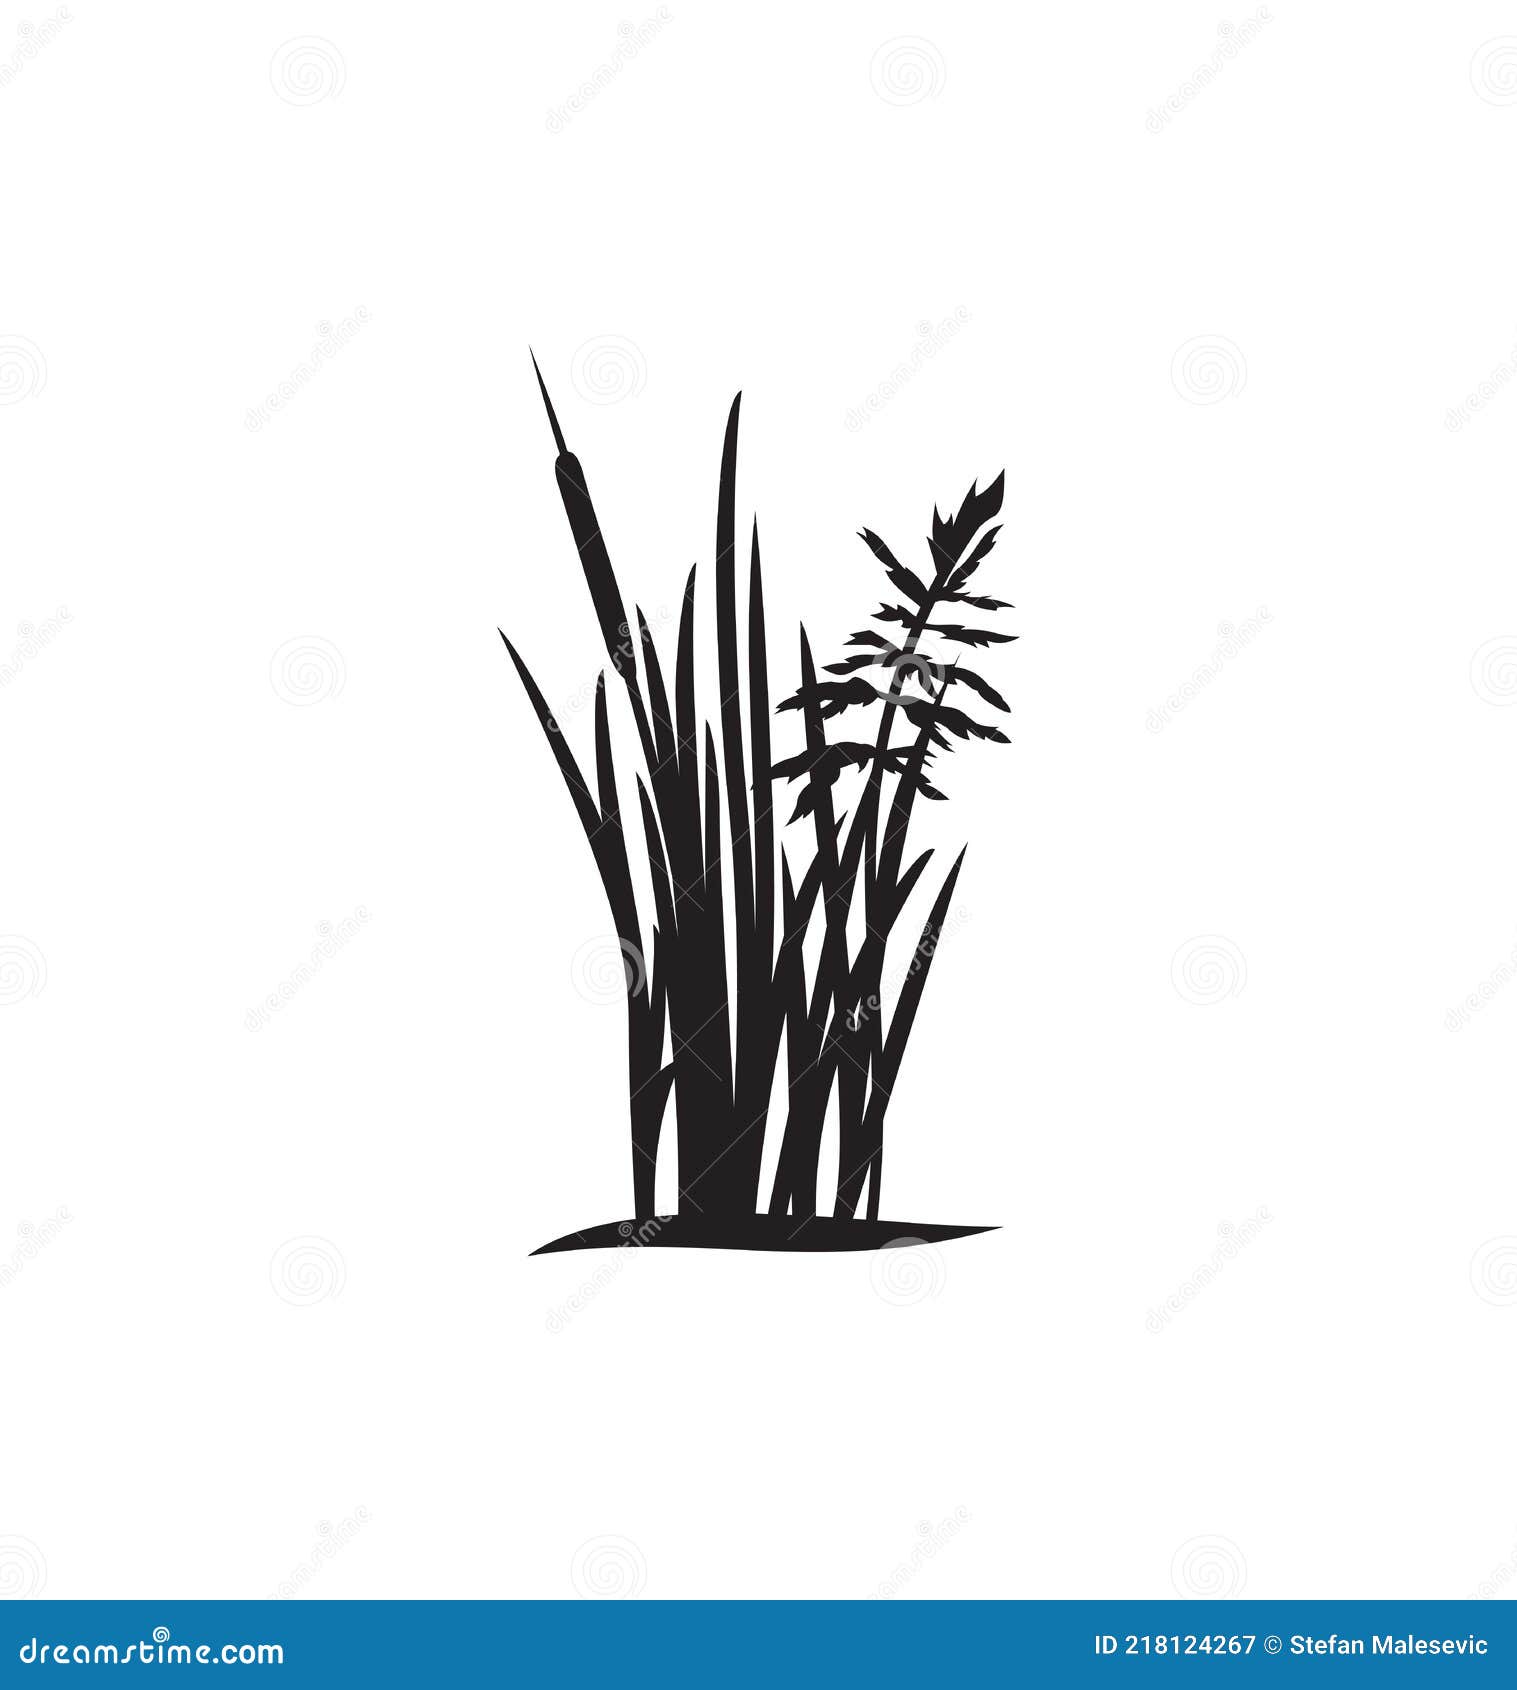 Grass silhouette stock vector. Illustration of nature - 218124267